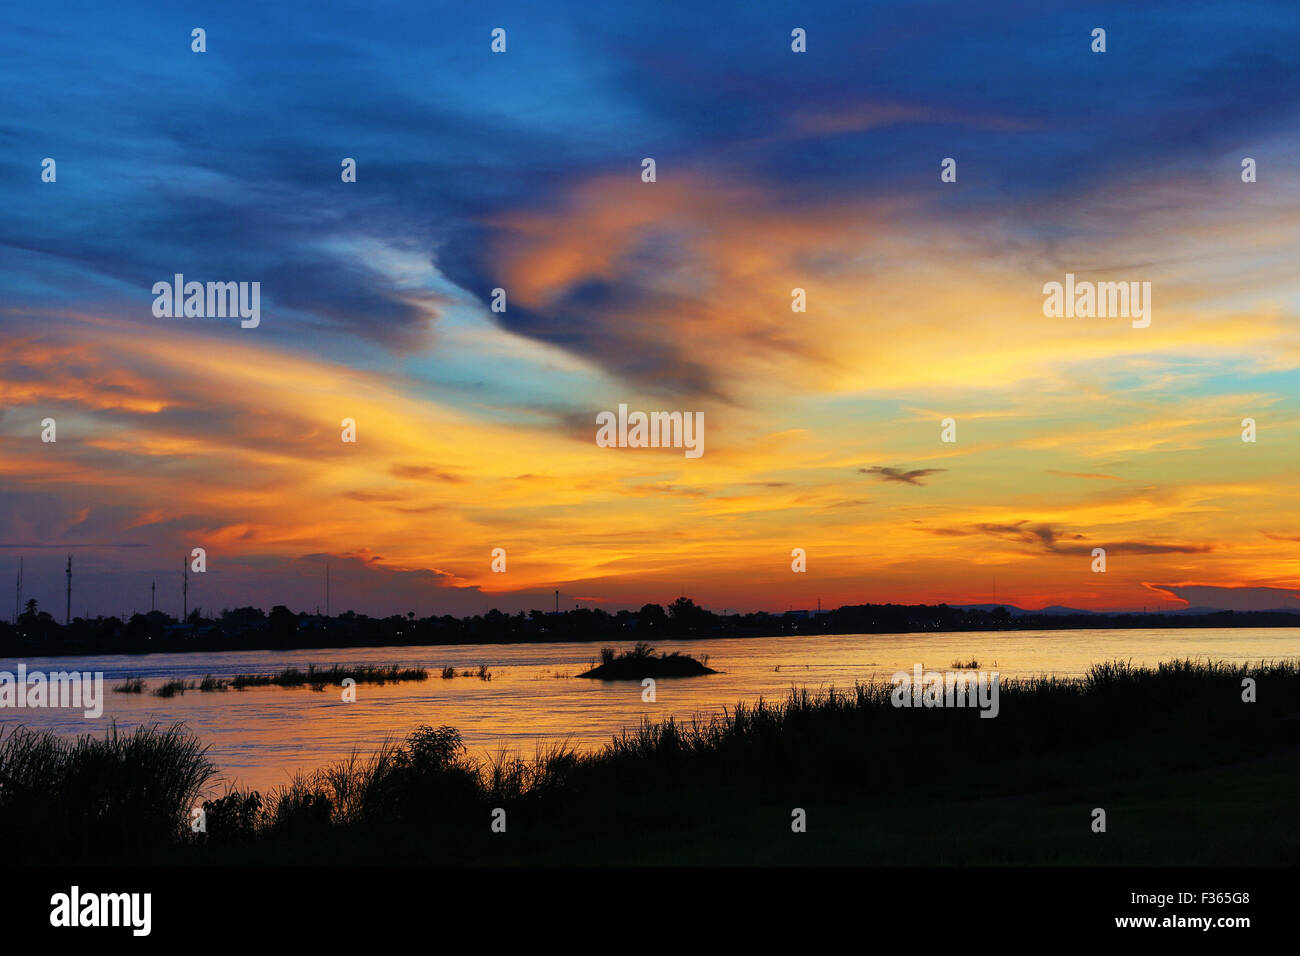 Sunset over the Mekong River Vientiane Laos Stock Photo   Alamy